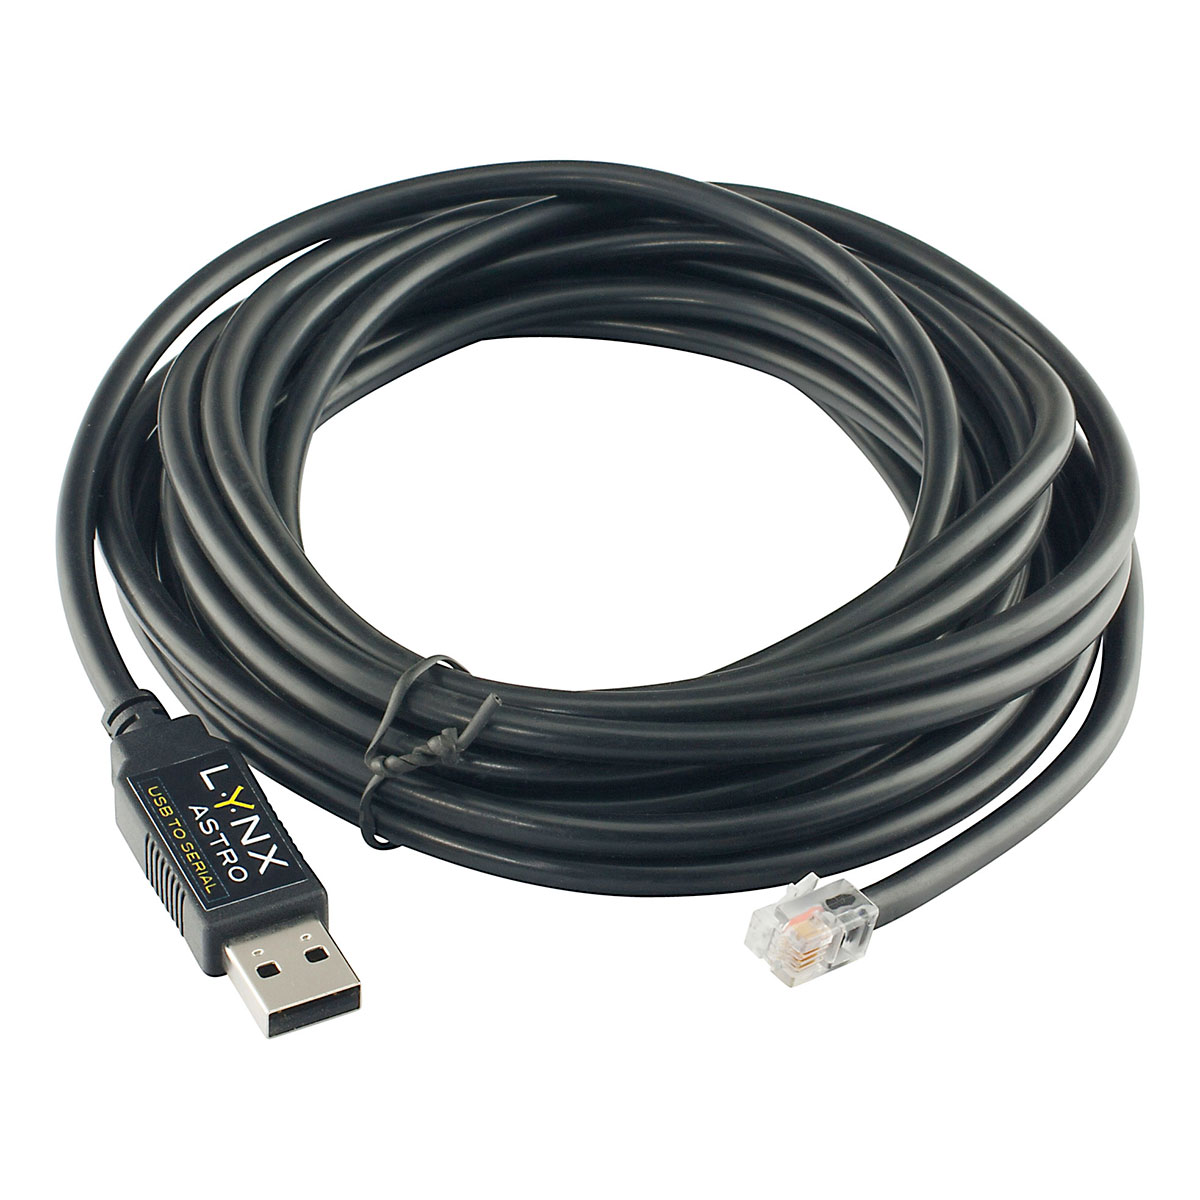 Lynx Astro FTDI USB to Serial Adapter for Celestron Handsets (5m)